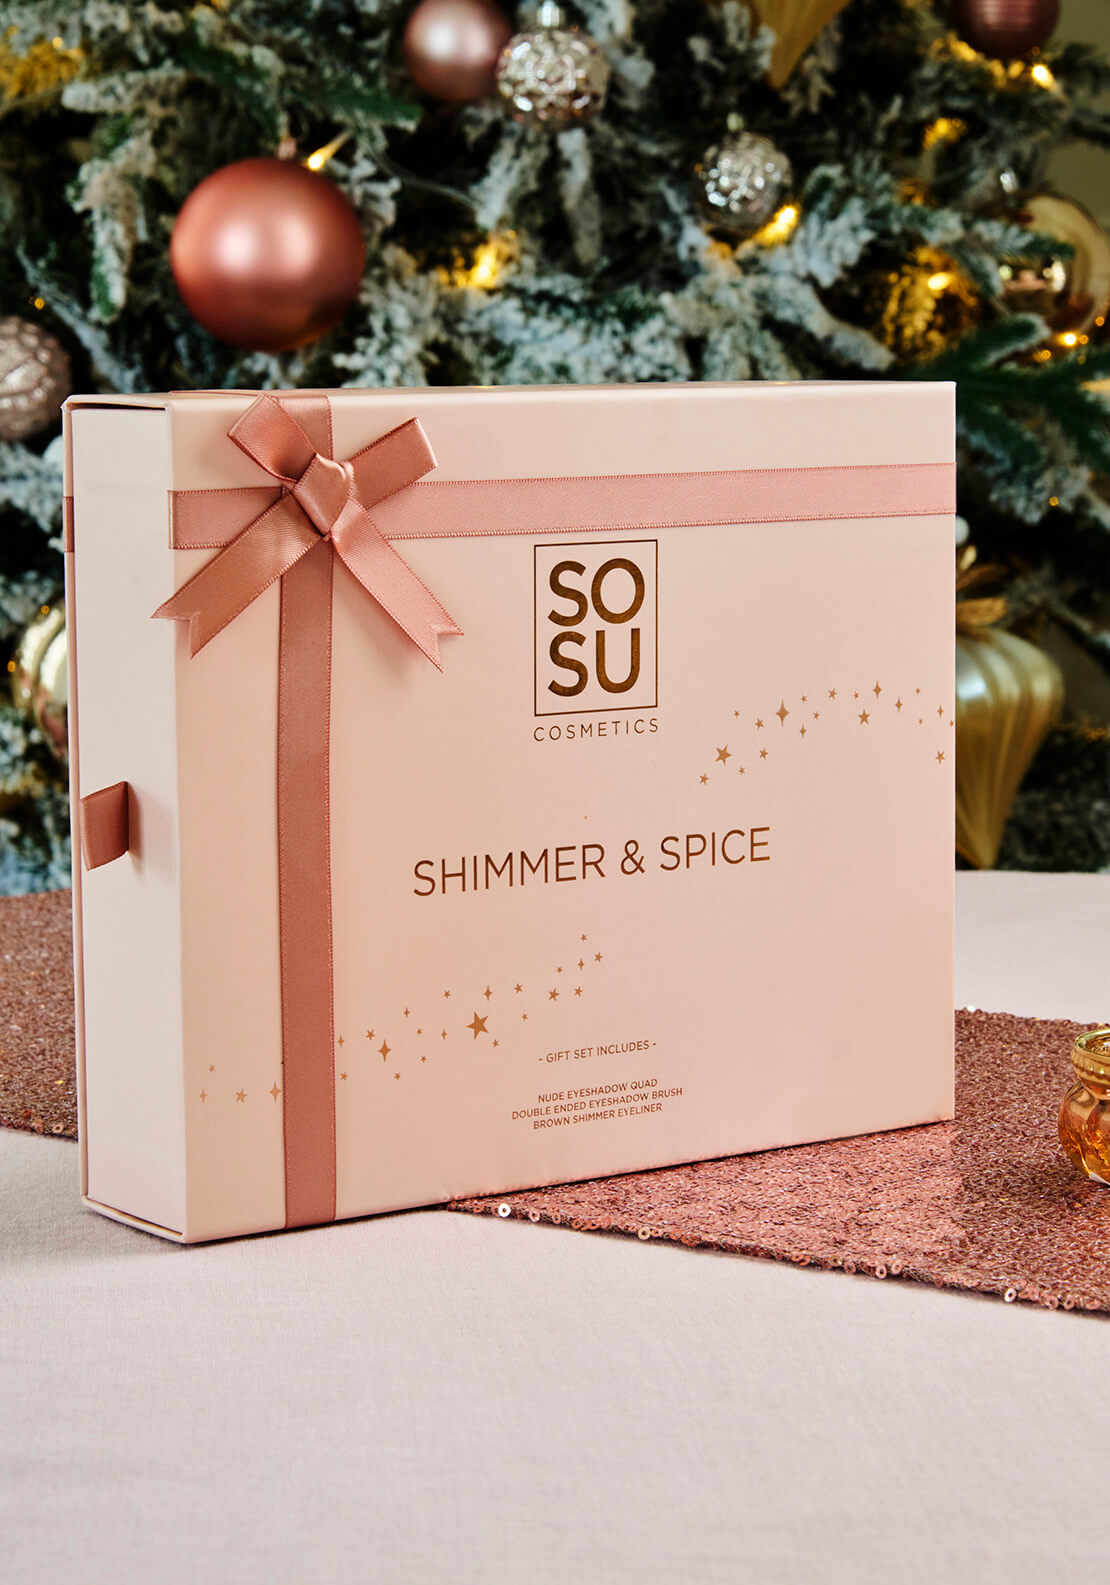 Sosu Shimmer And Spice Set 1 Shaws Department Stores